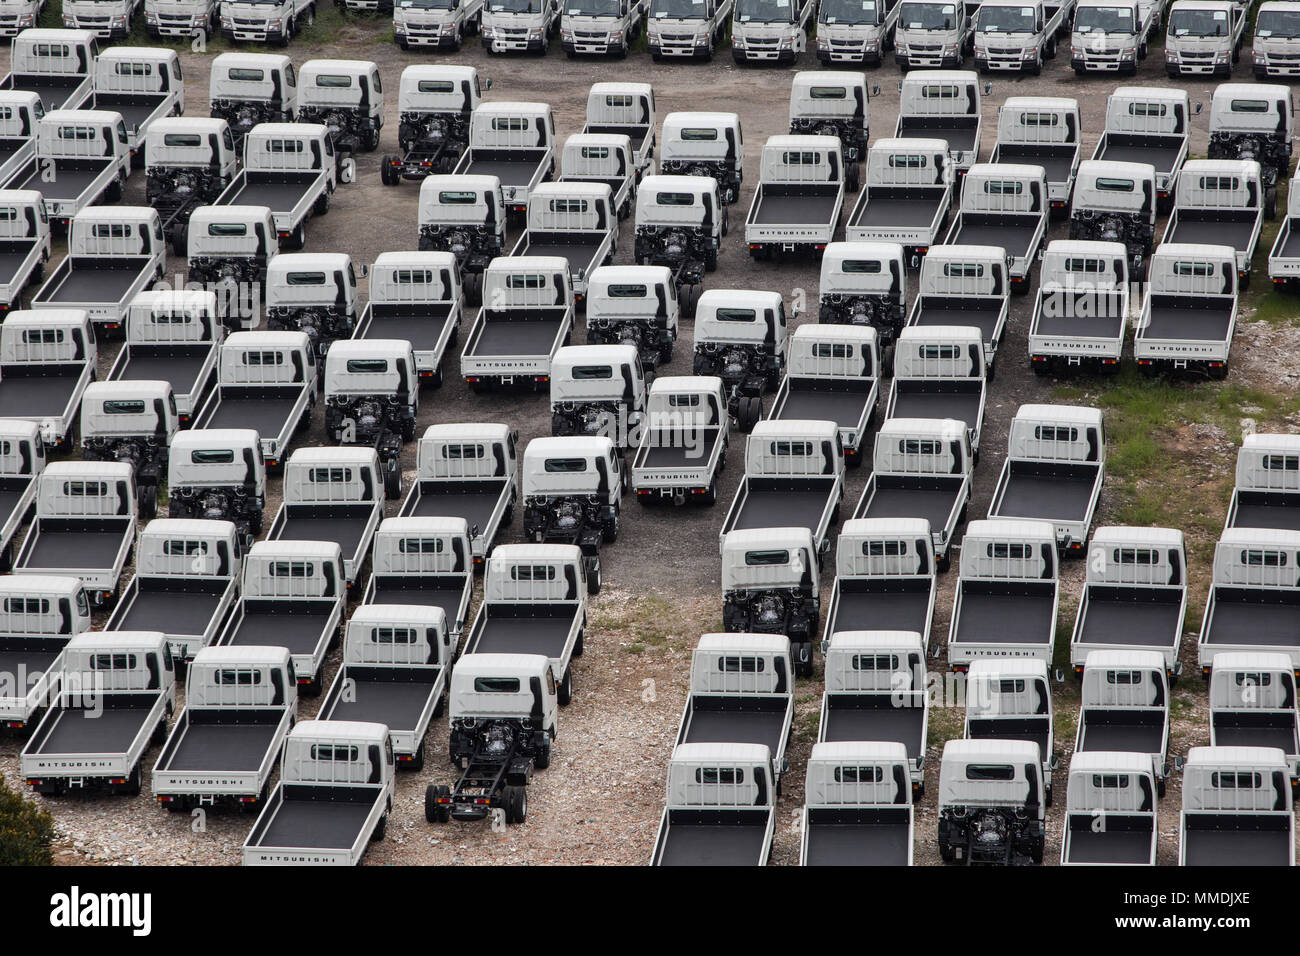 An aerial view of industrial light vehicles parked neatly in an open space. Stock Photo